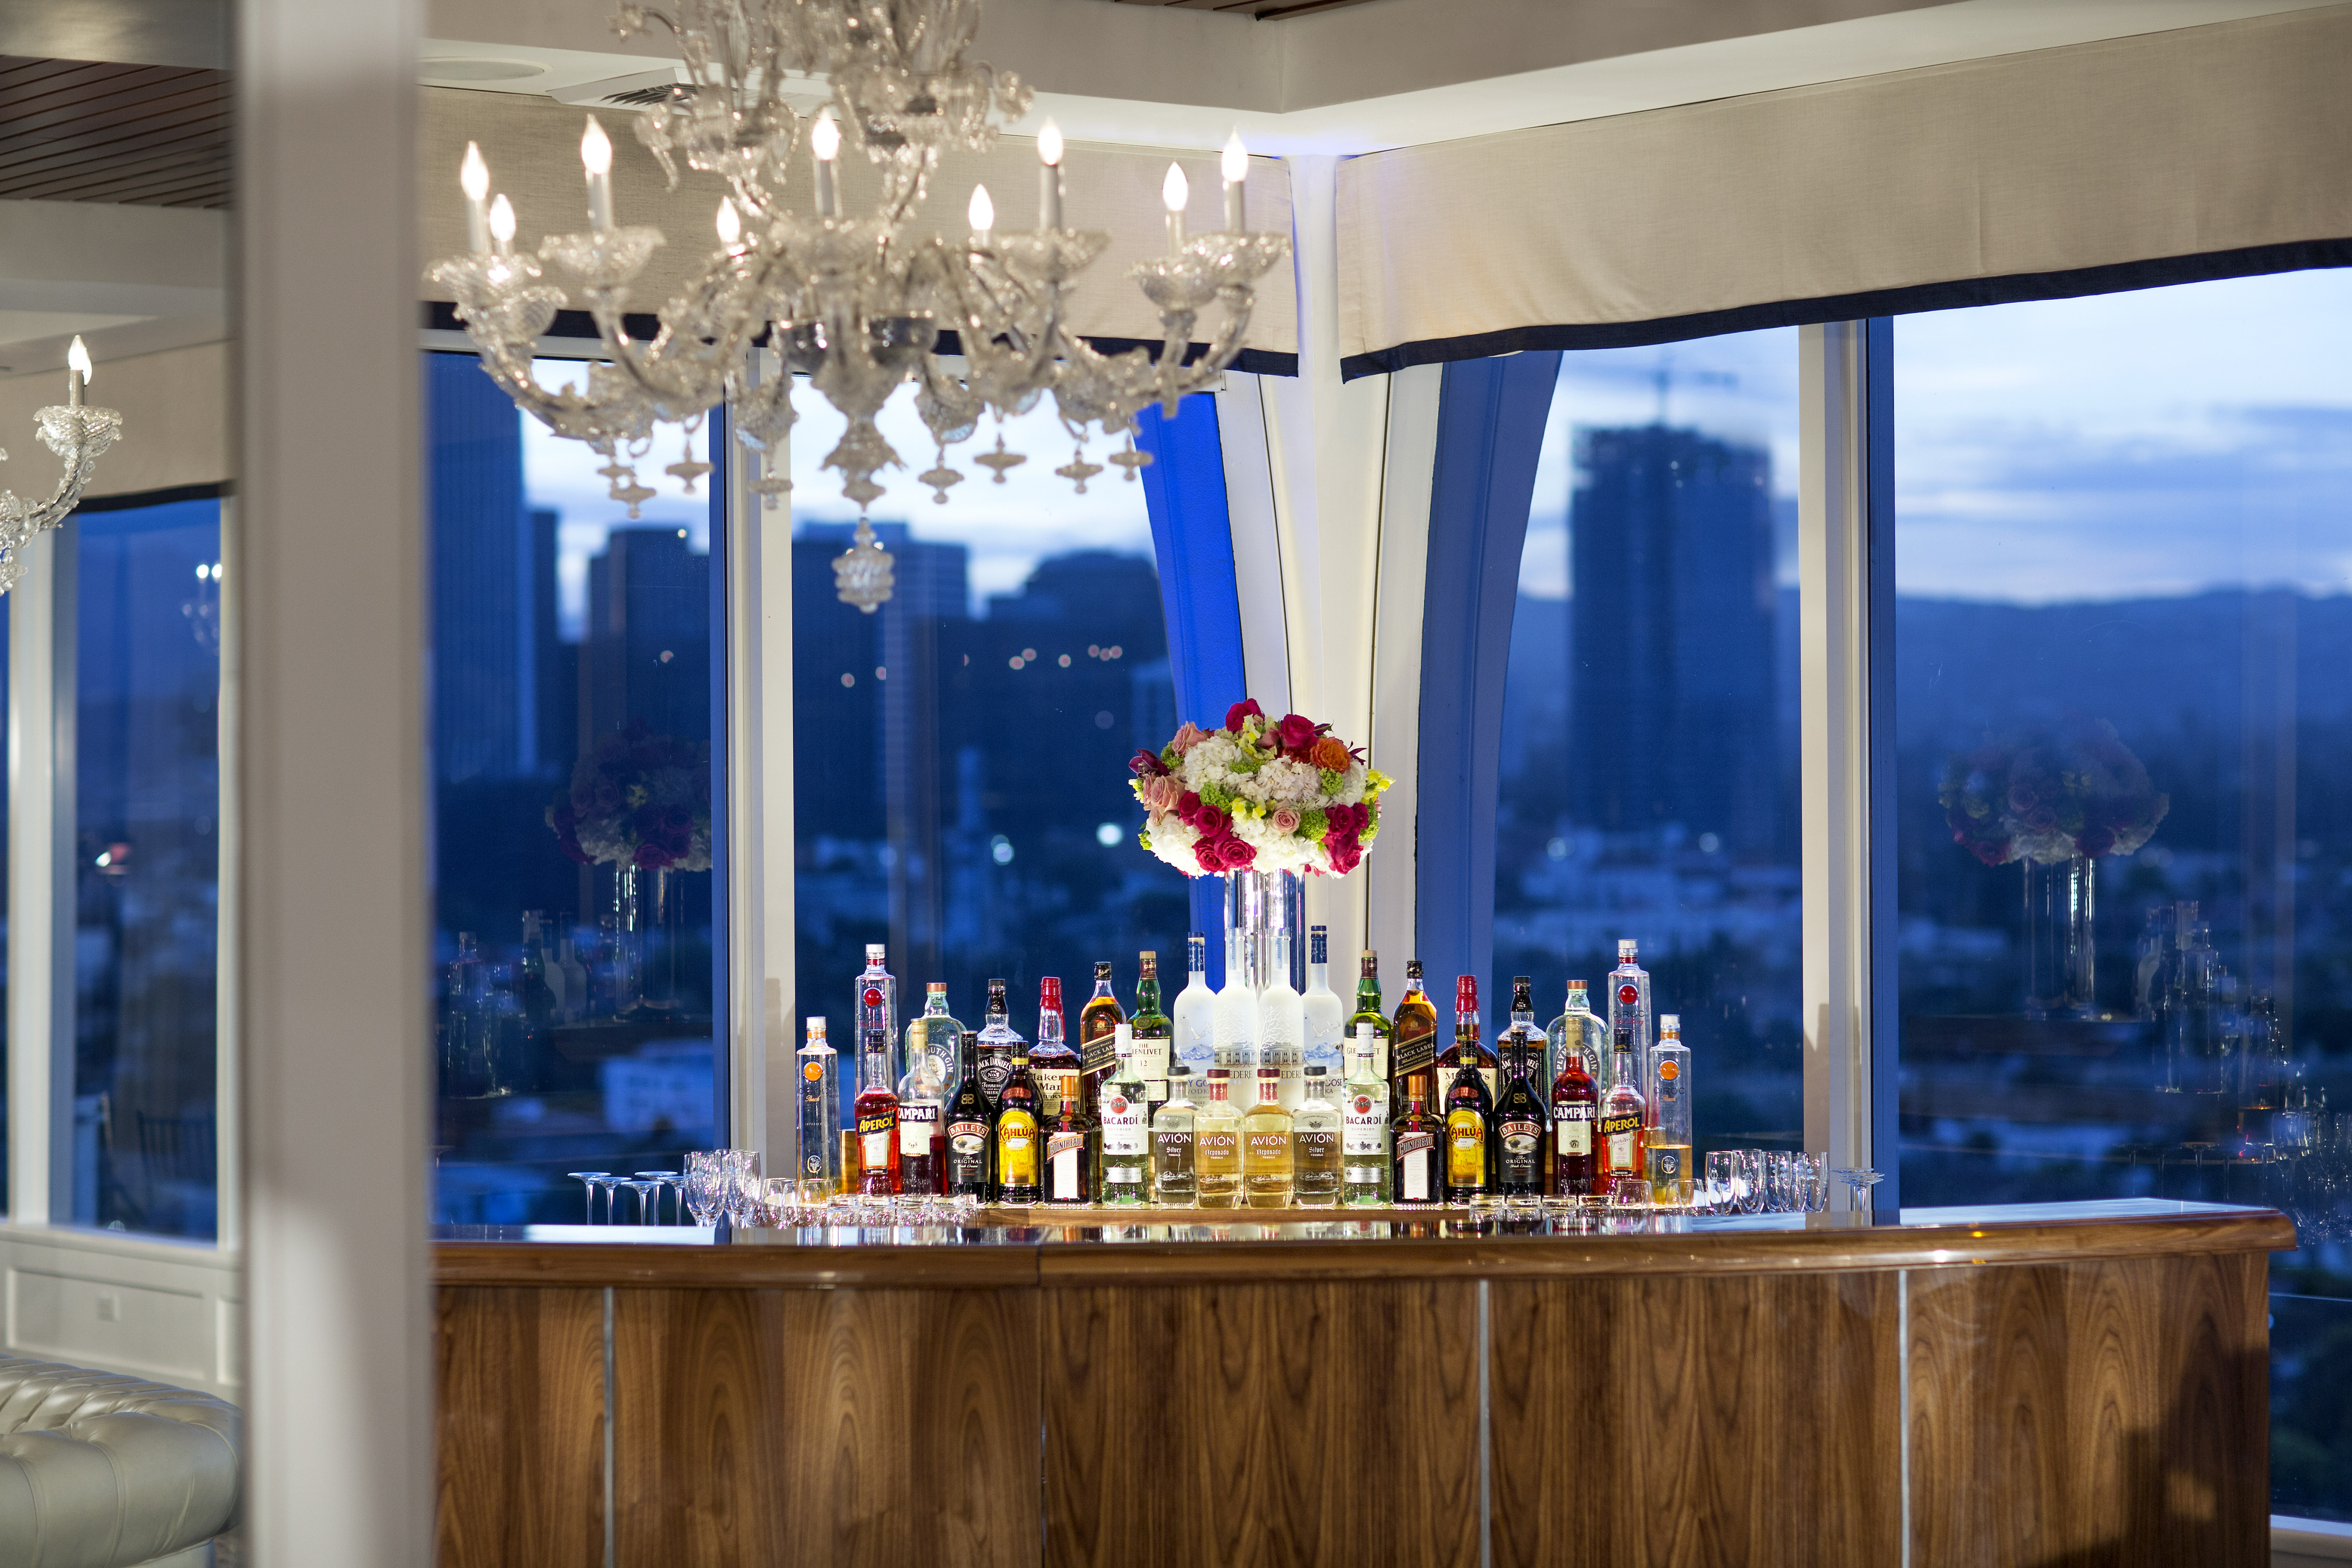 Bar area with drink options and chandelier